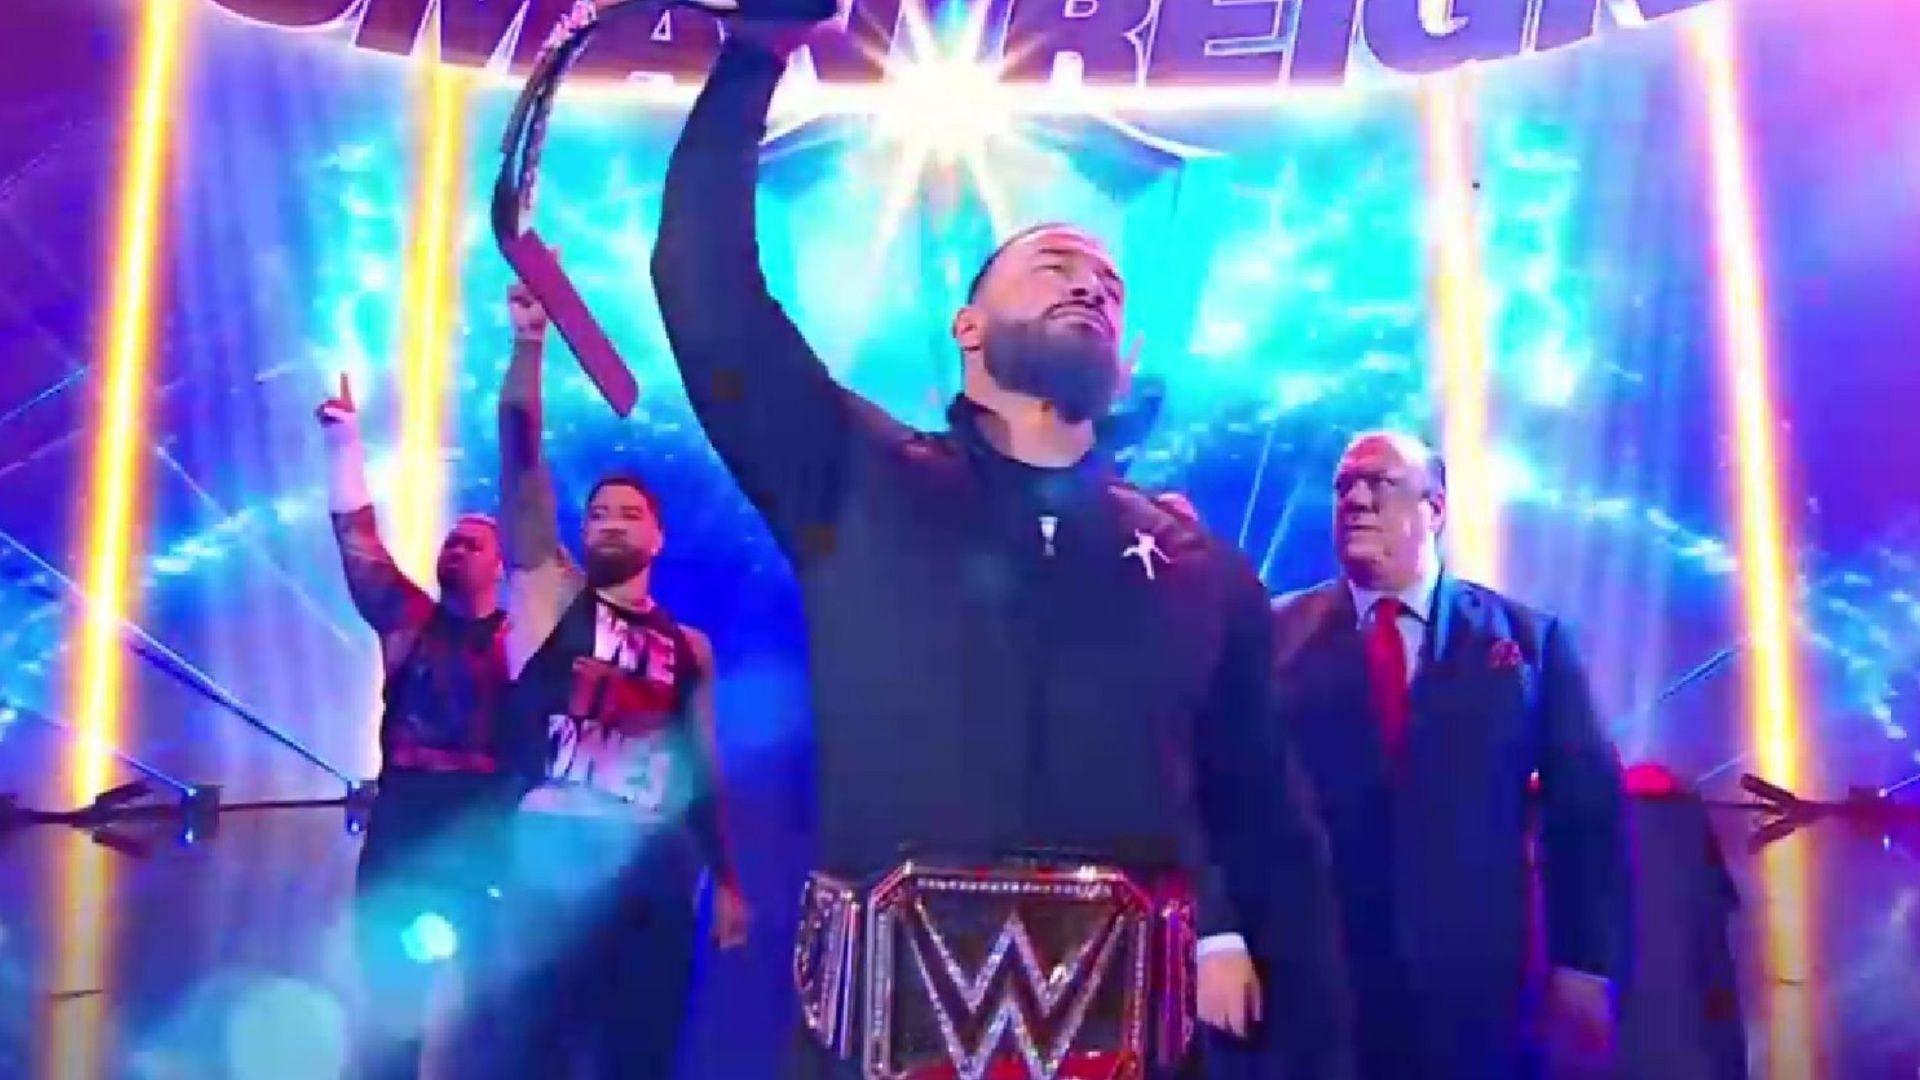 Roman Reigns makes his entrance on WWE SmackDown.